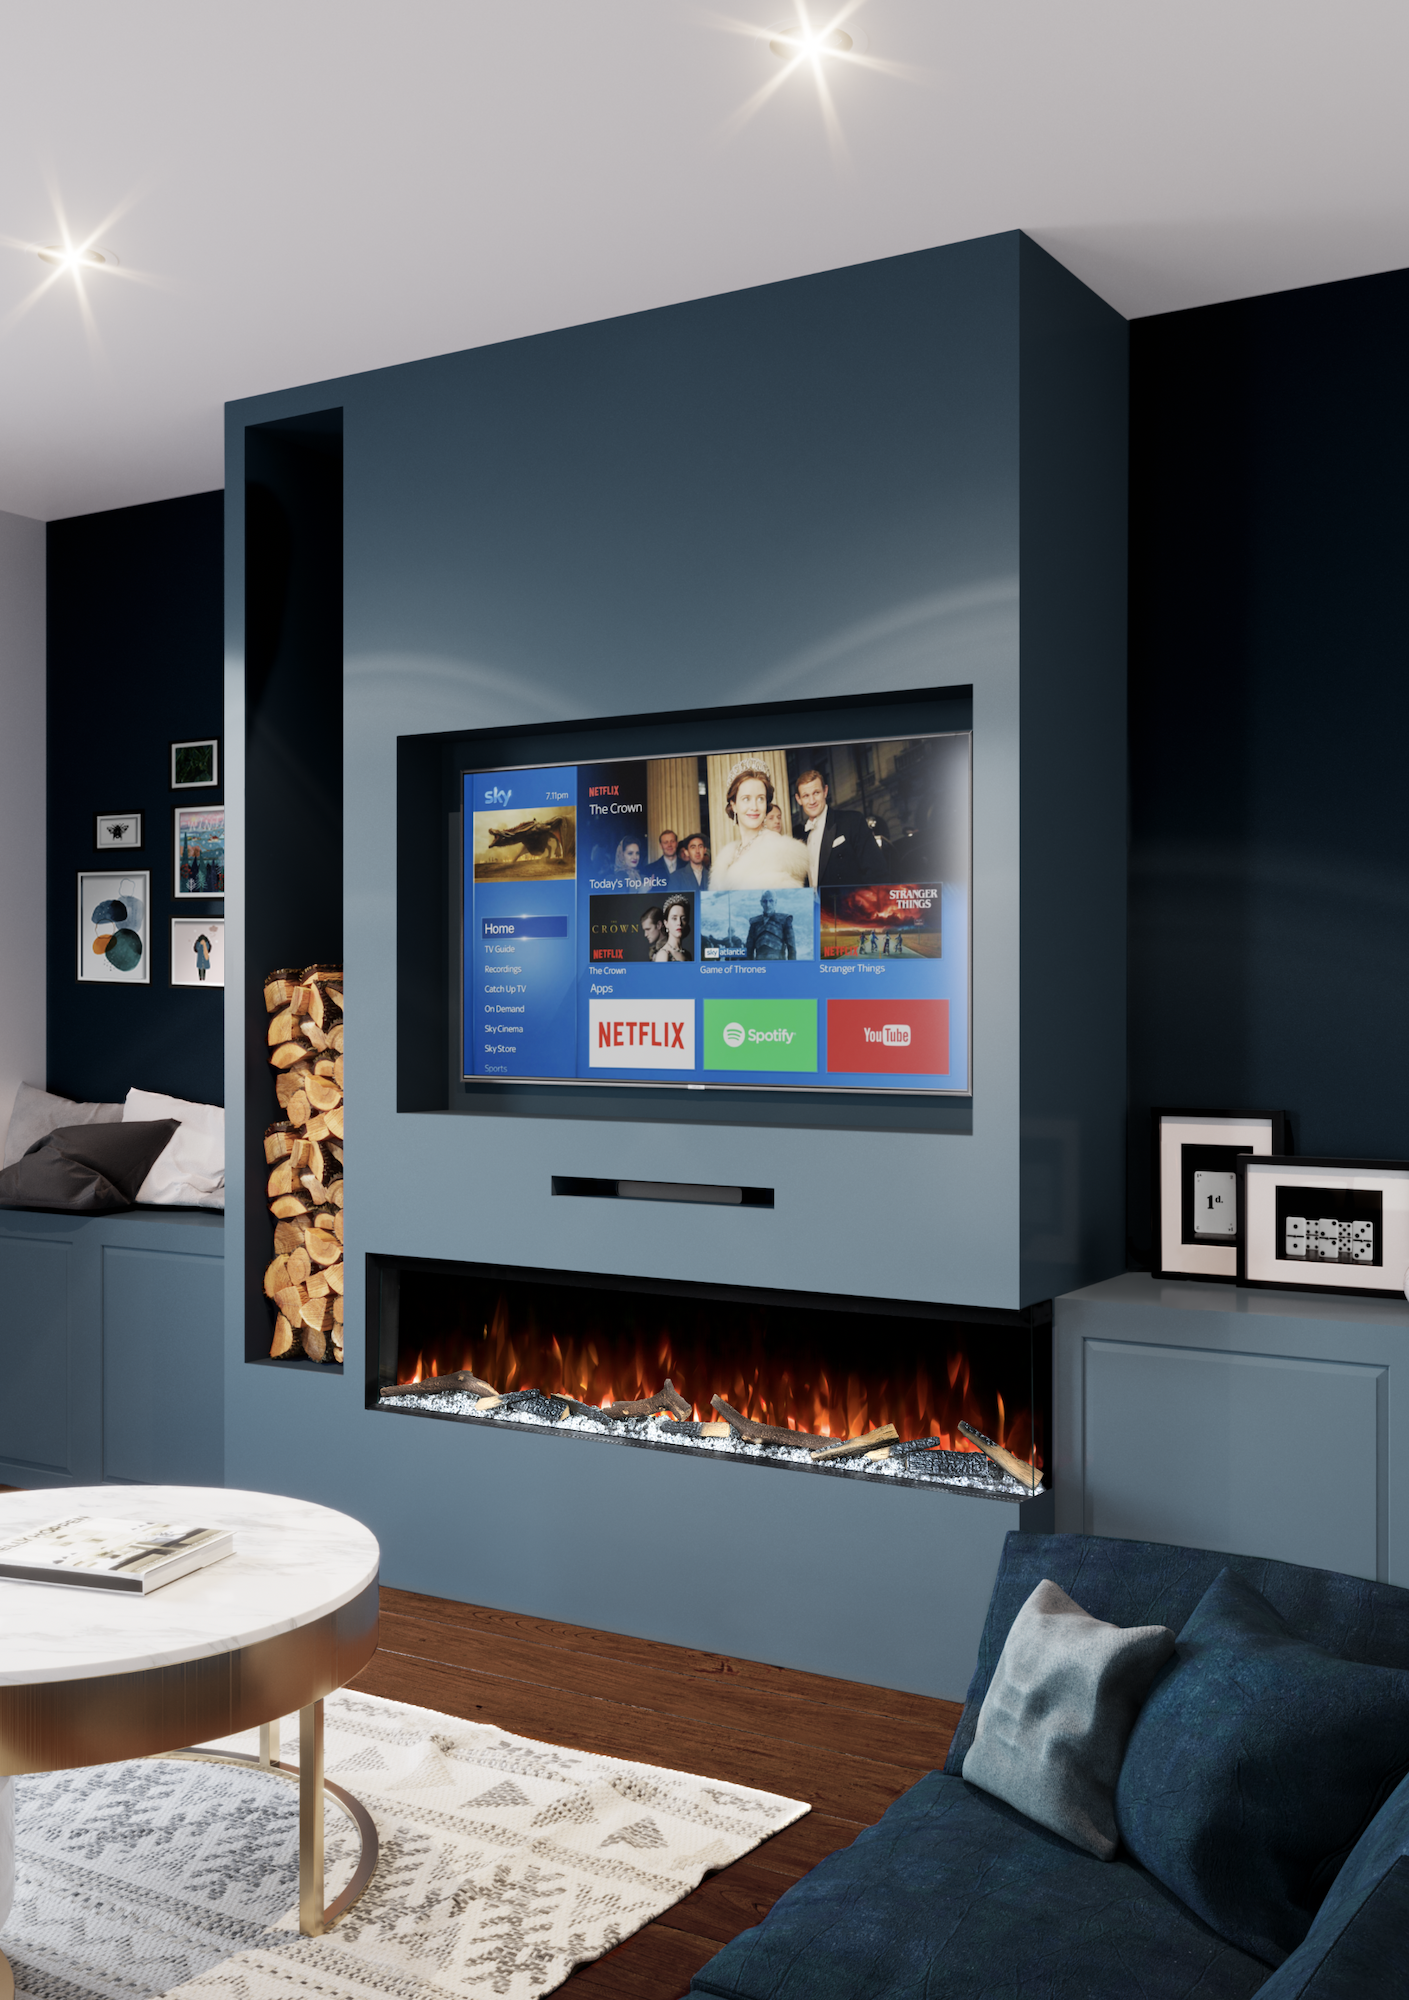 11 tv wall ideas that's both practical and stylish